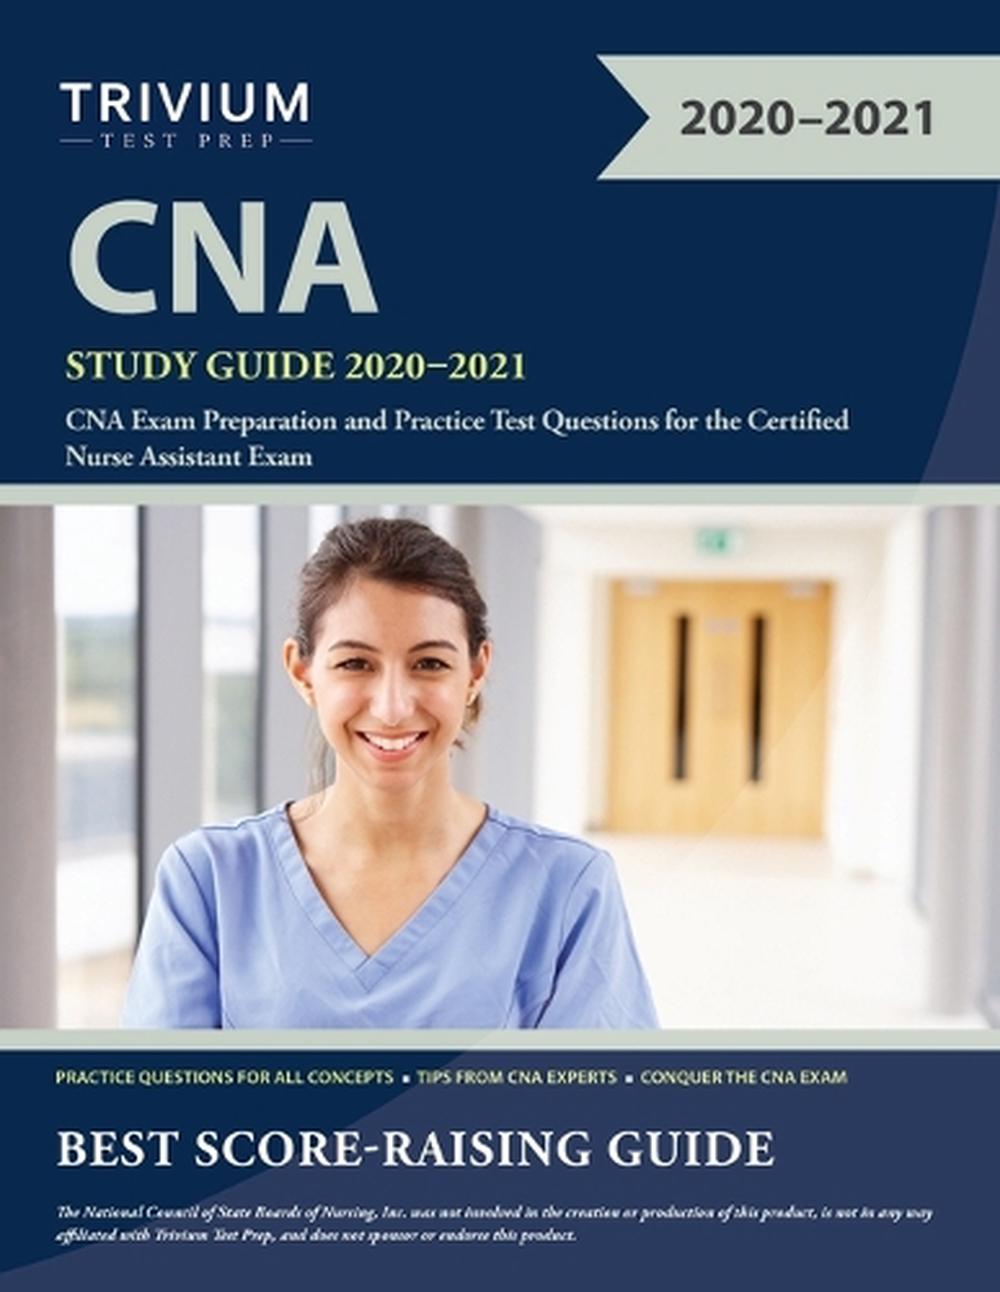 cna-study-guide-2020-2021-cna-exam-preparation-and-practice-test-questions-for-9781635307115-ebay